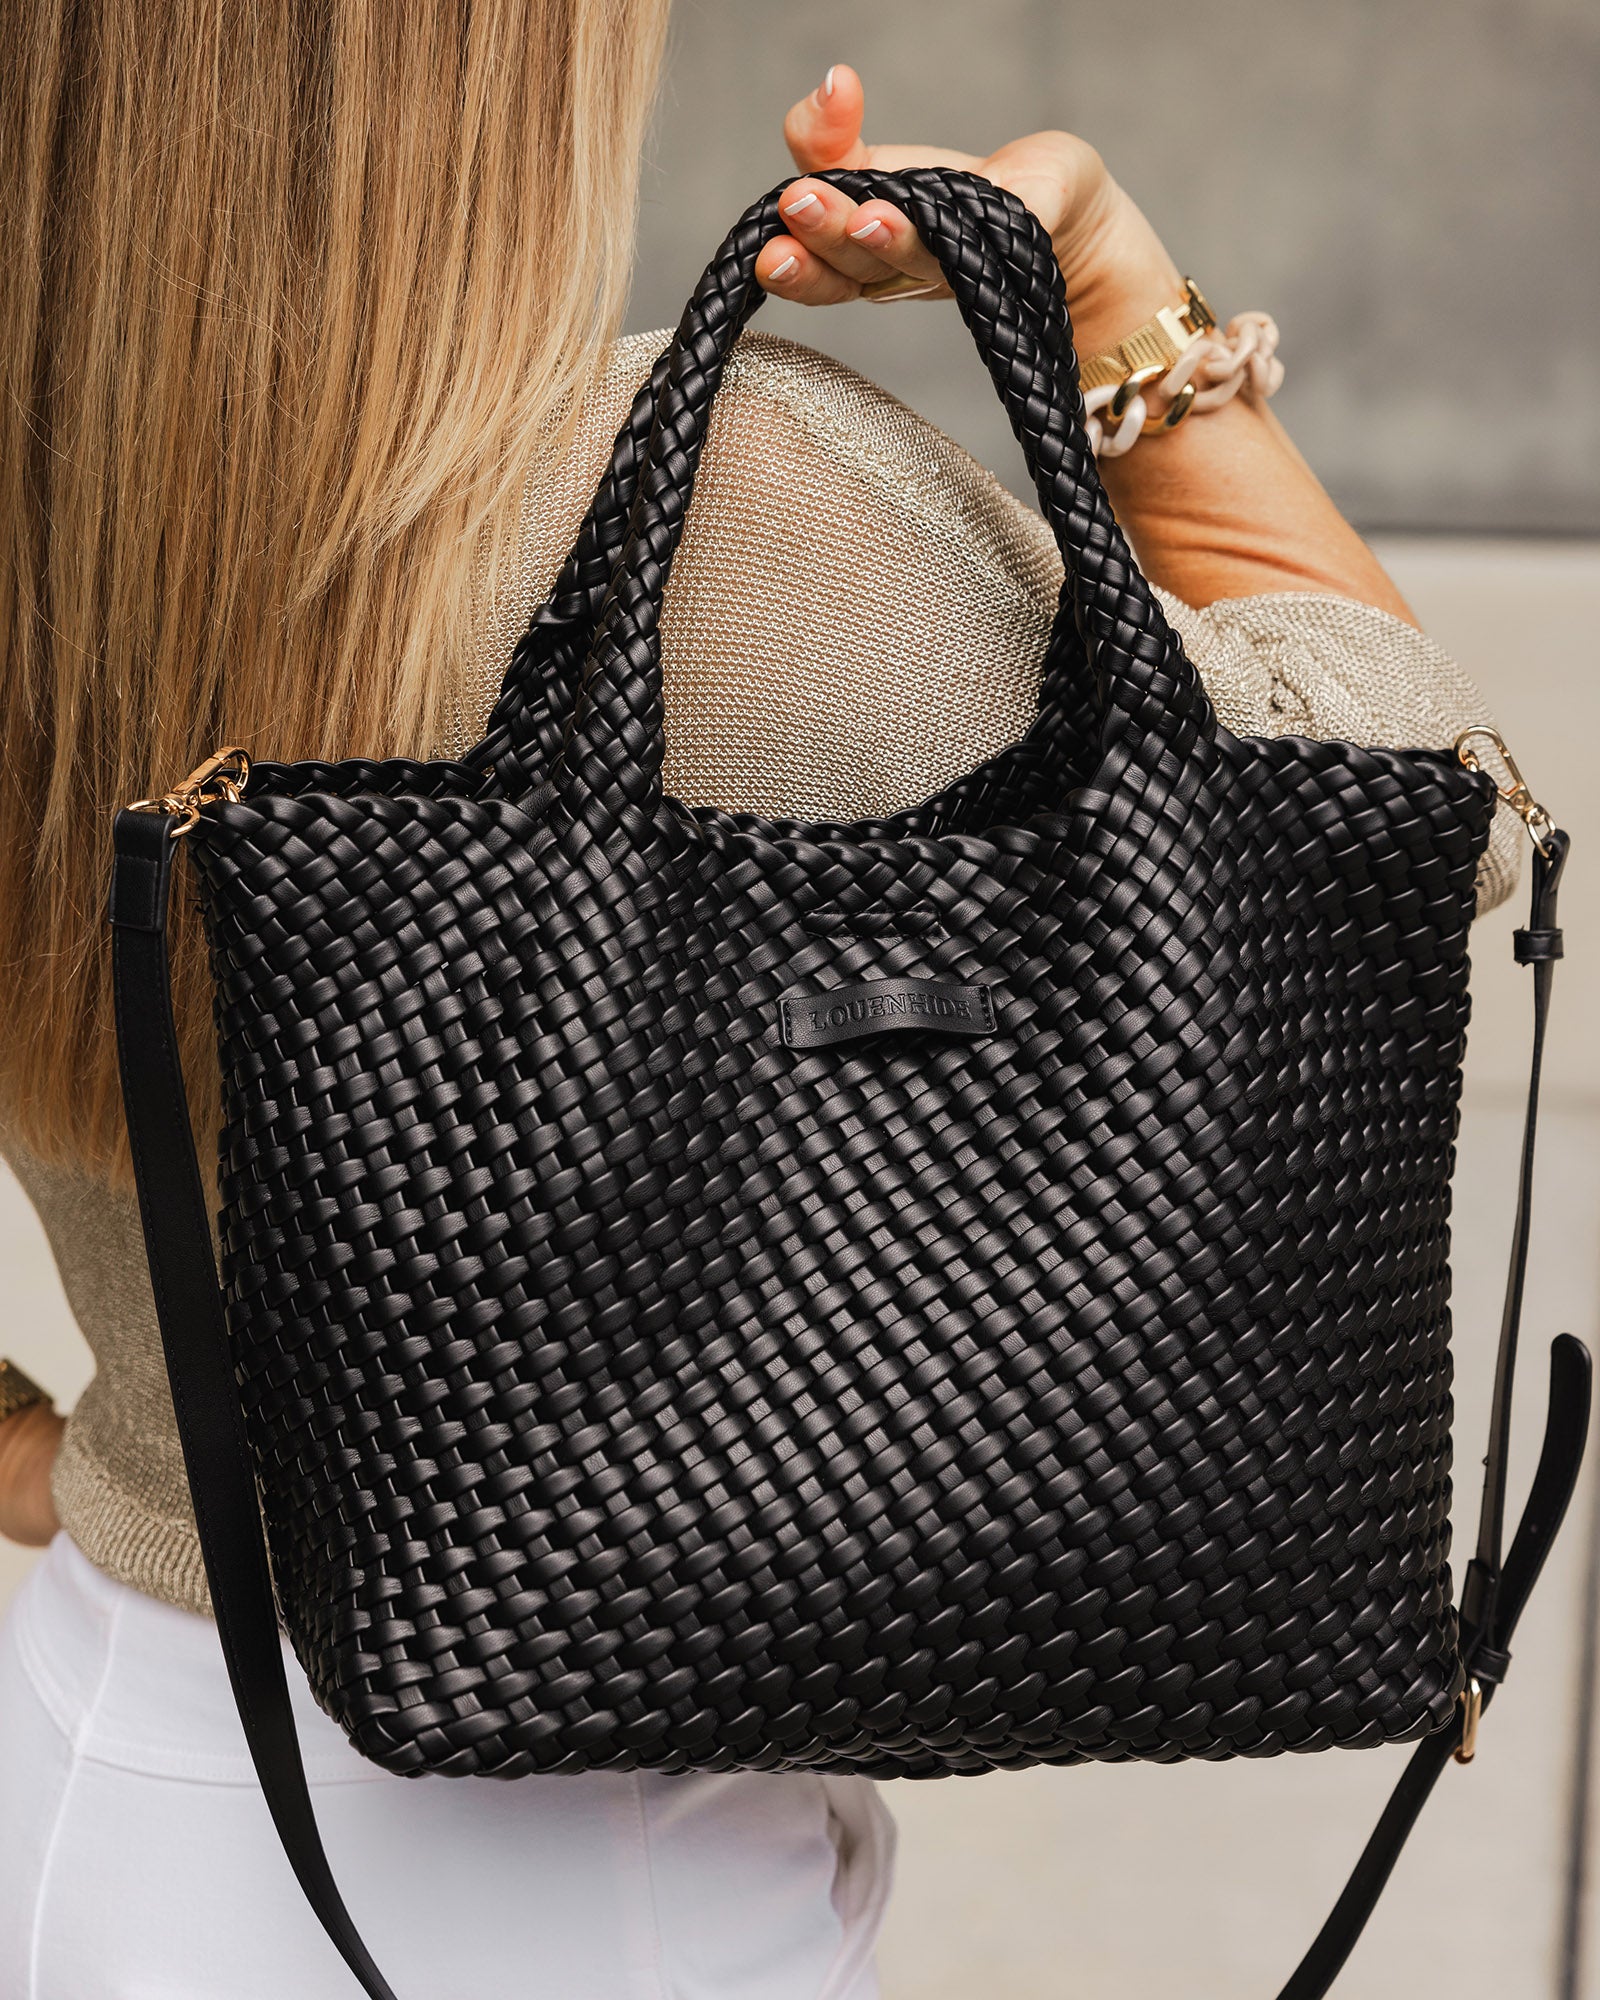 A woman wearing a gold lurex knit holding a black, woven tote bag by the handles